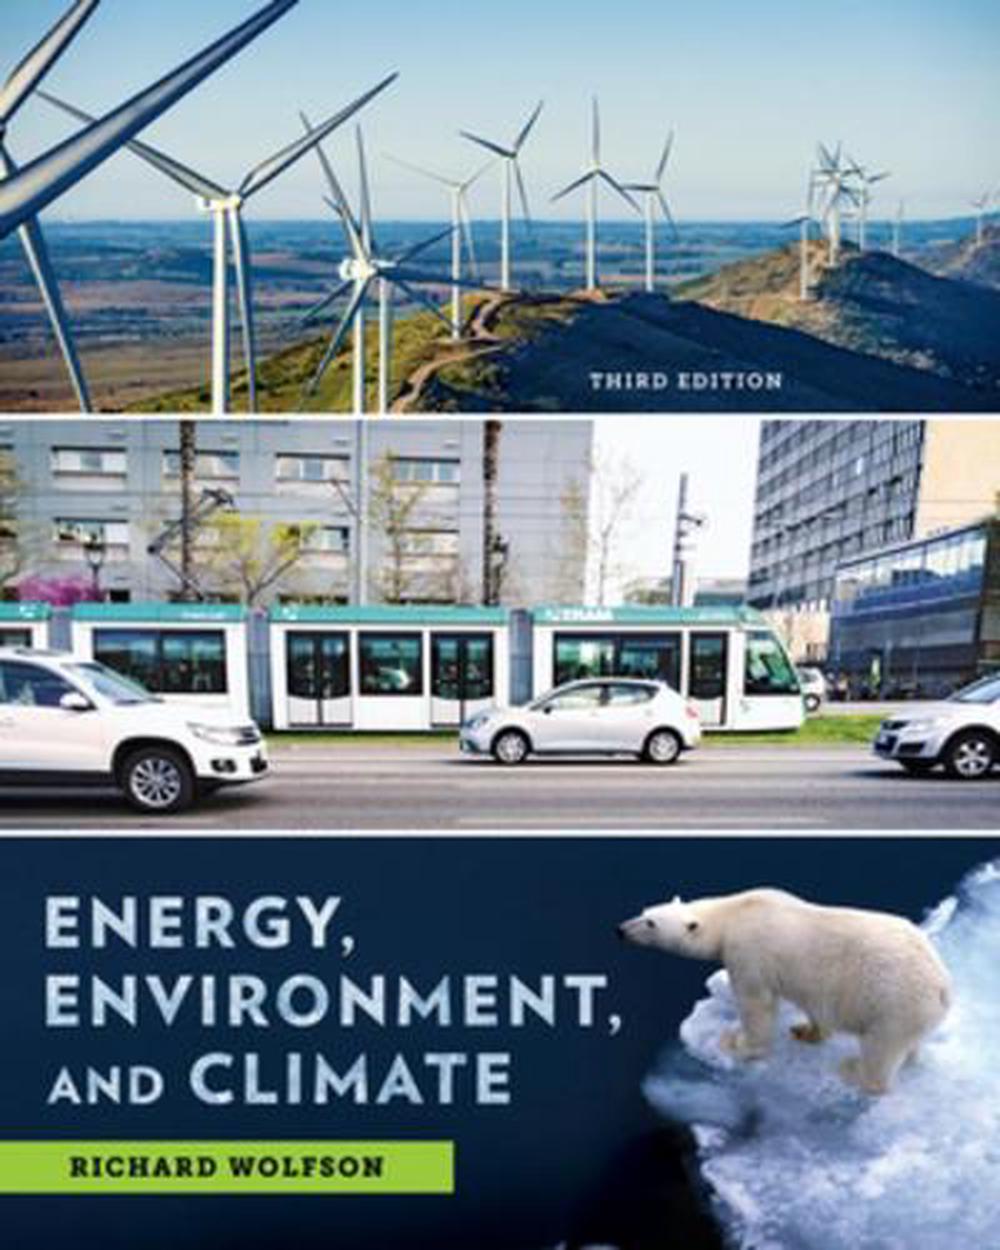 Energy, Environment, and Climate by Richard Wolfson (English) Paperback